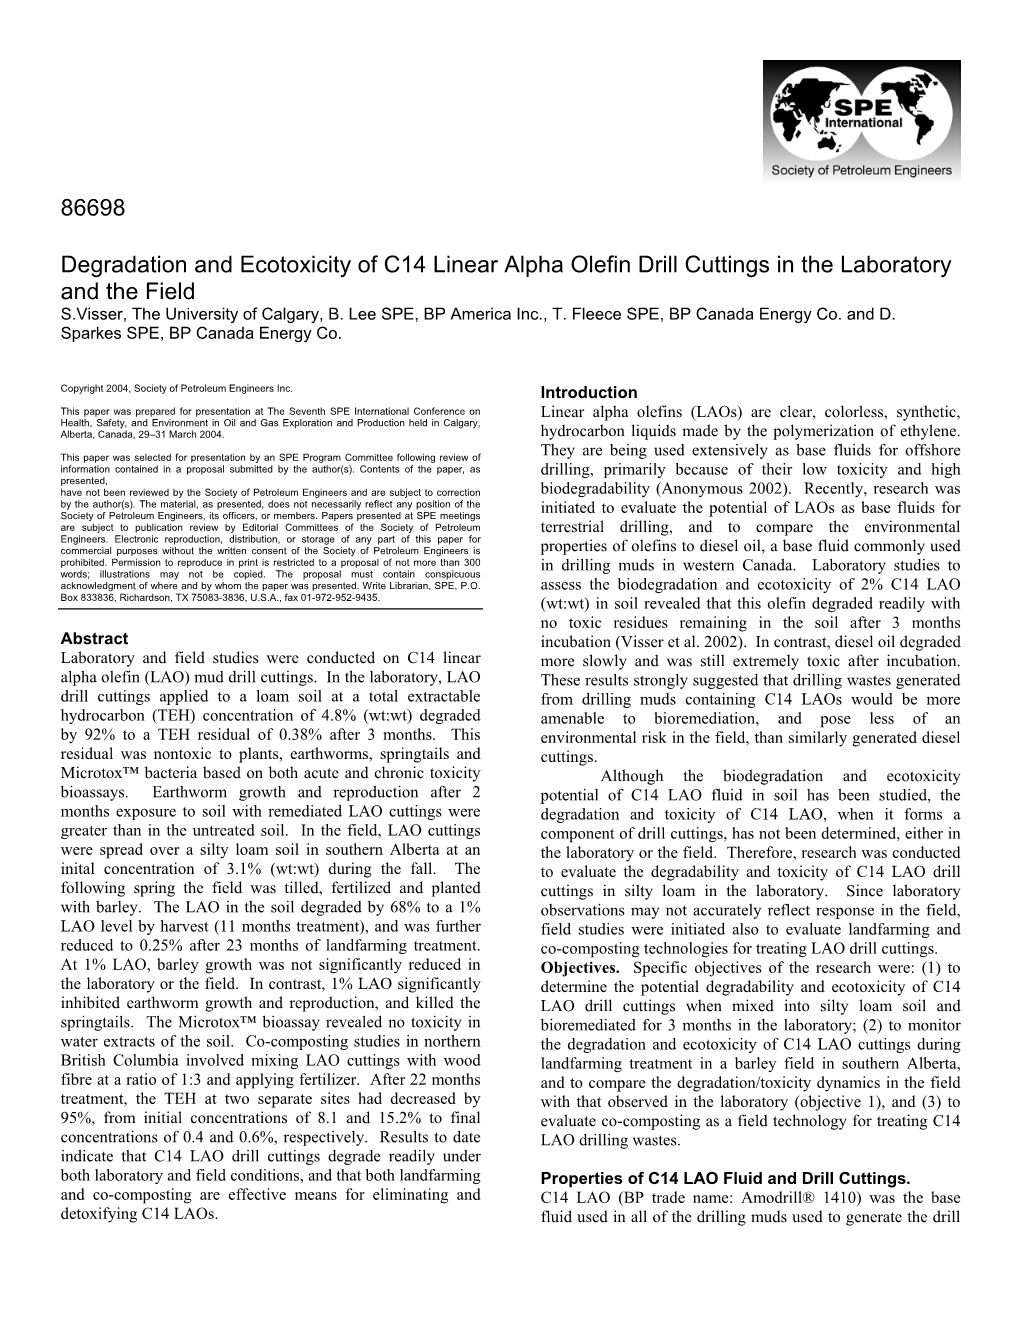 Degradation and Ecotoxicity of C14 Linear Alpha Olefin Drill Cuttings in the Laboratory and the Field S.Visser, the University of Calgary, B